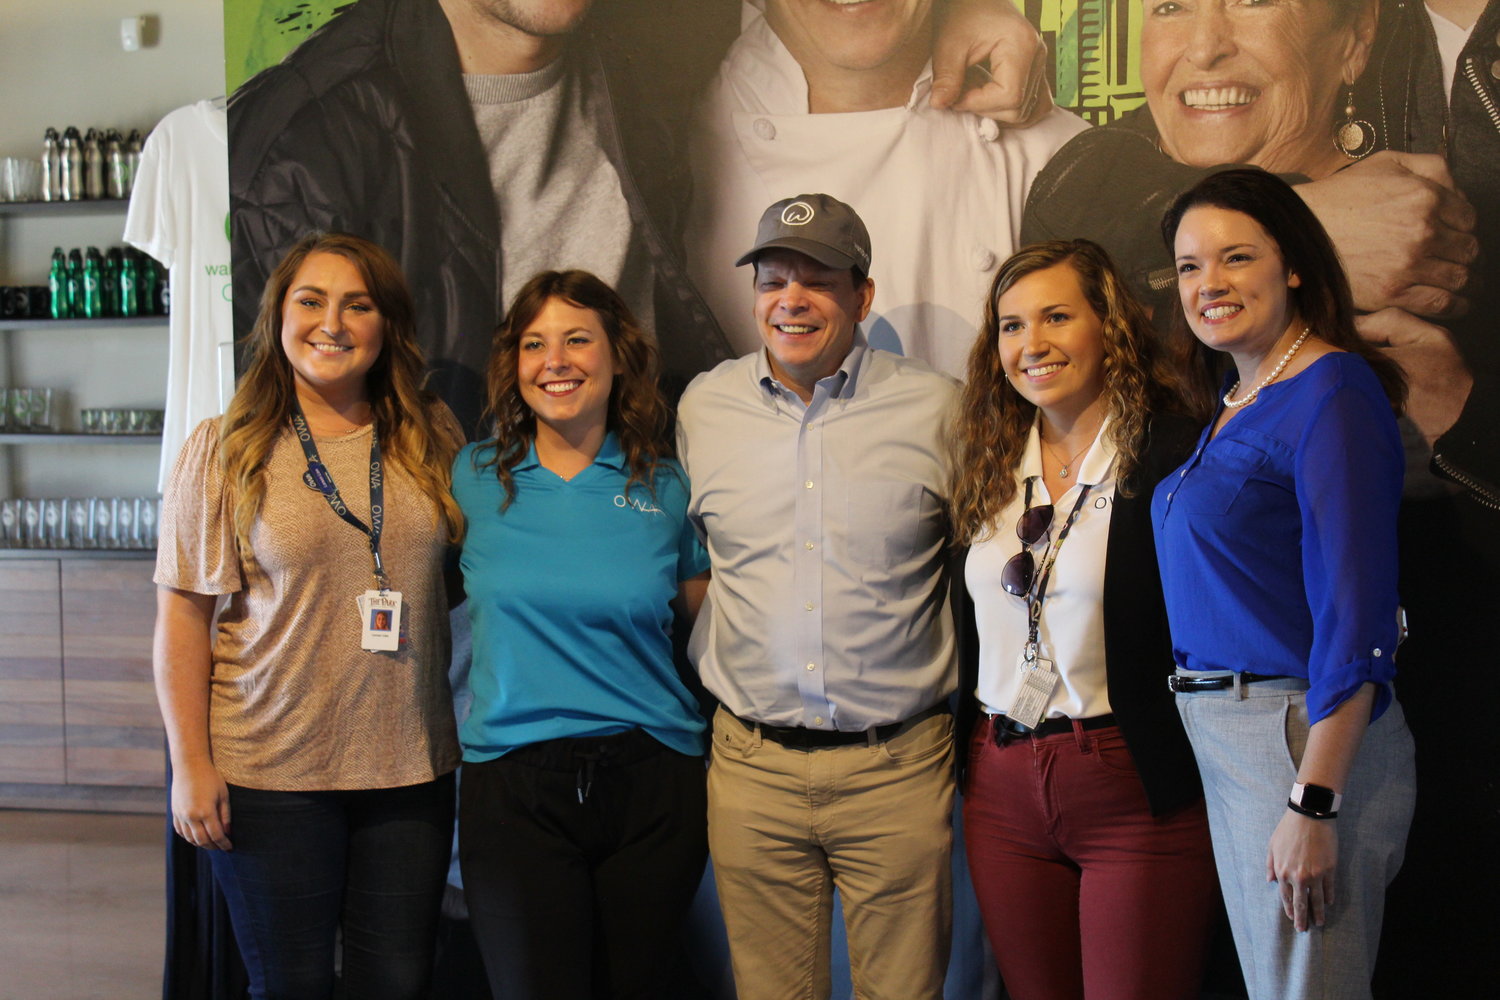 Paul Wahlberg visited OWA location during 2019.